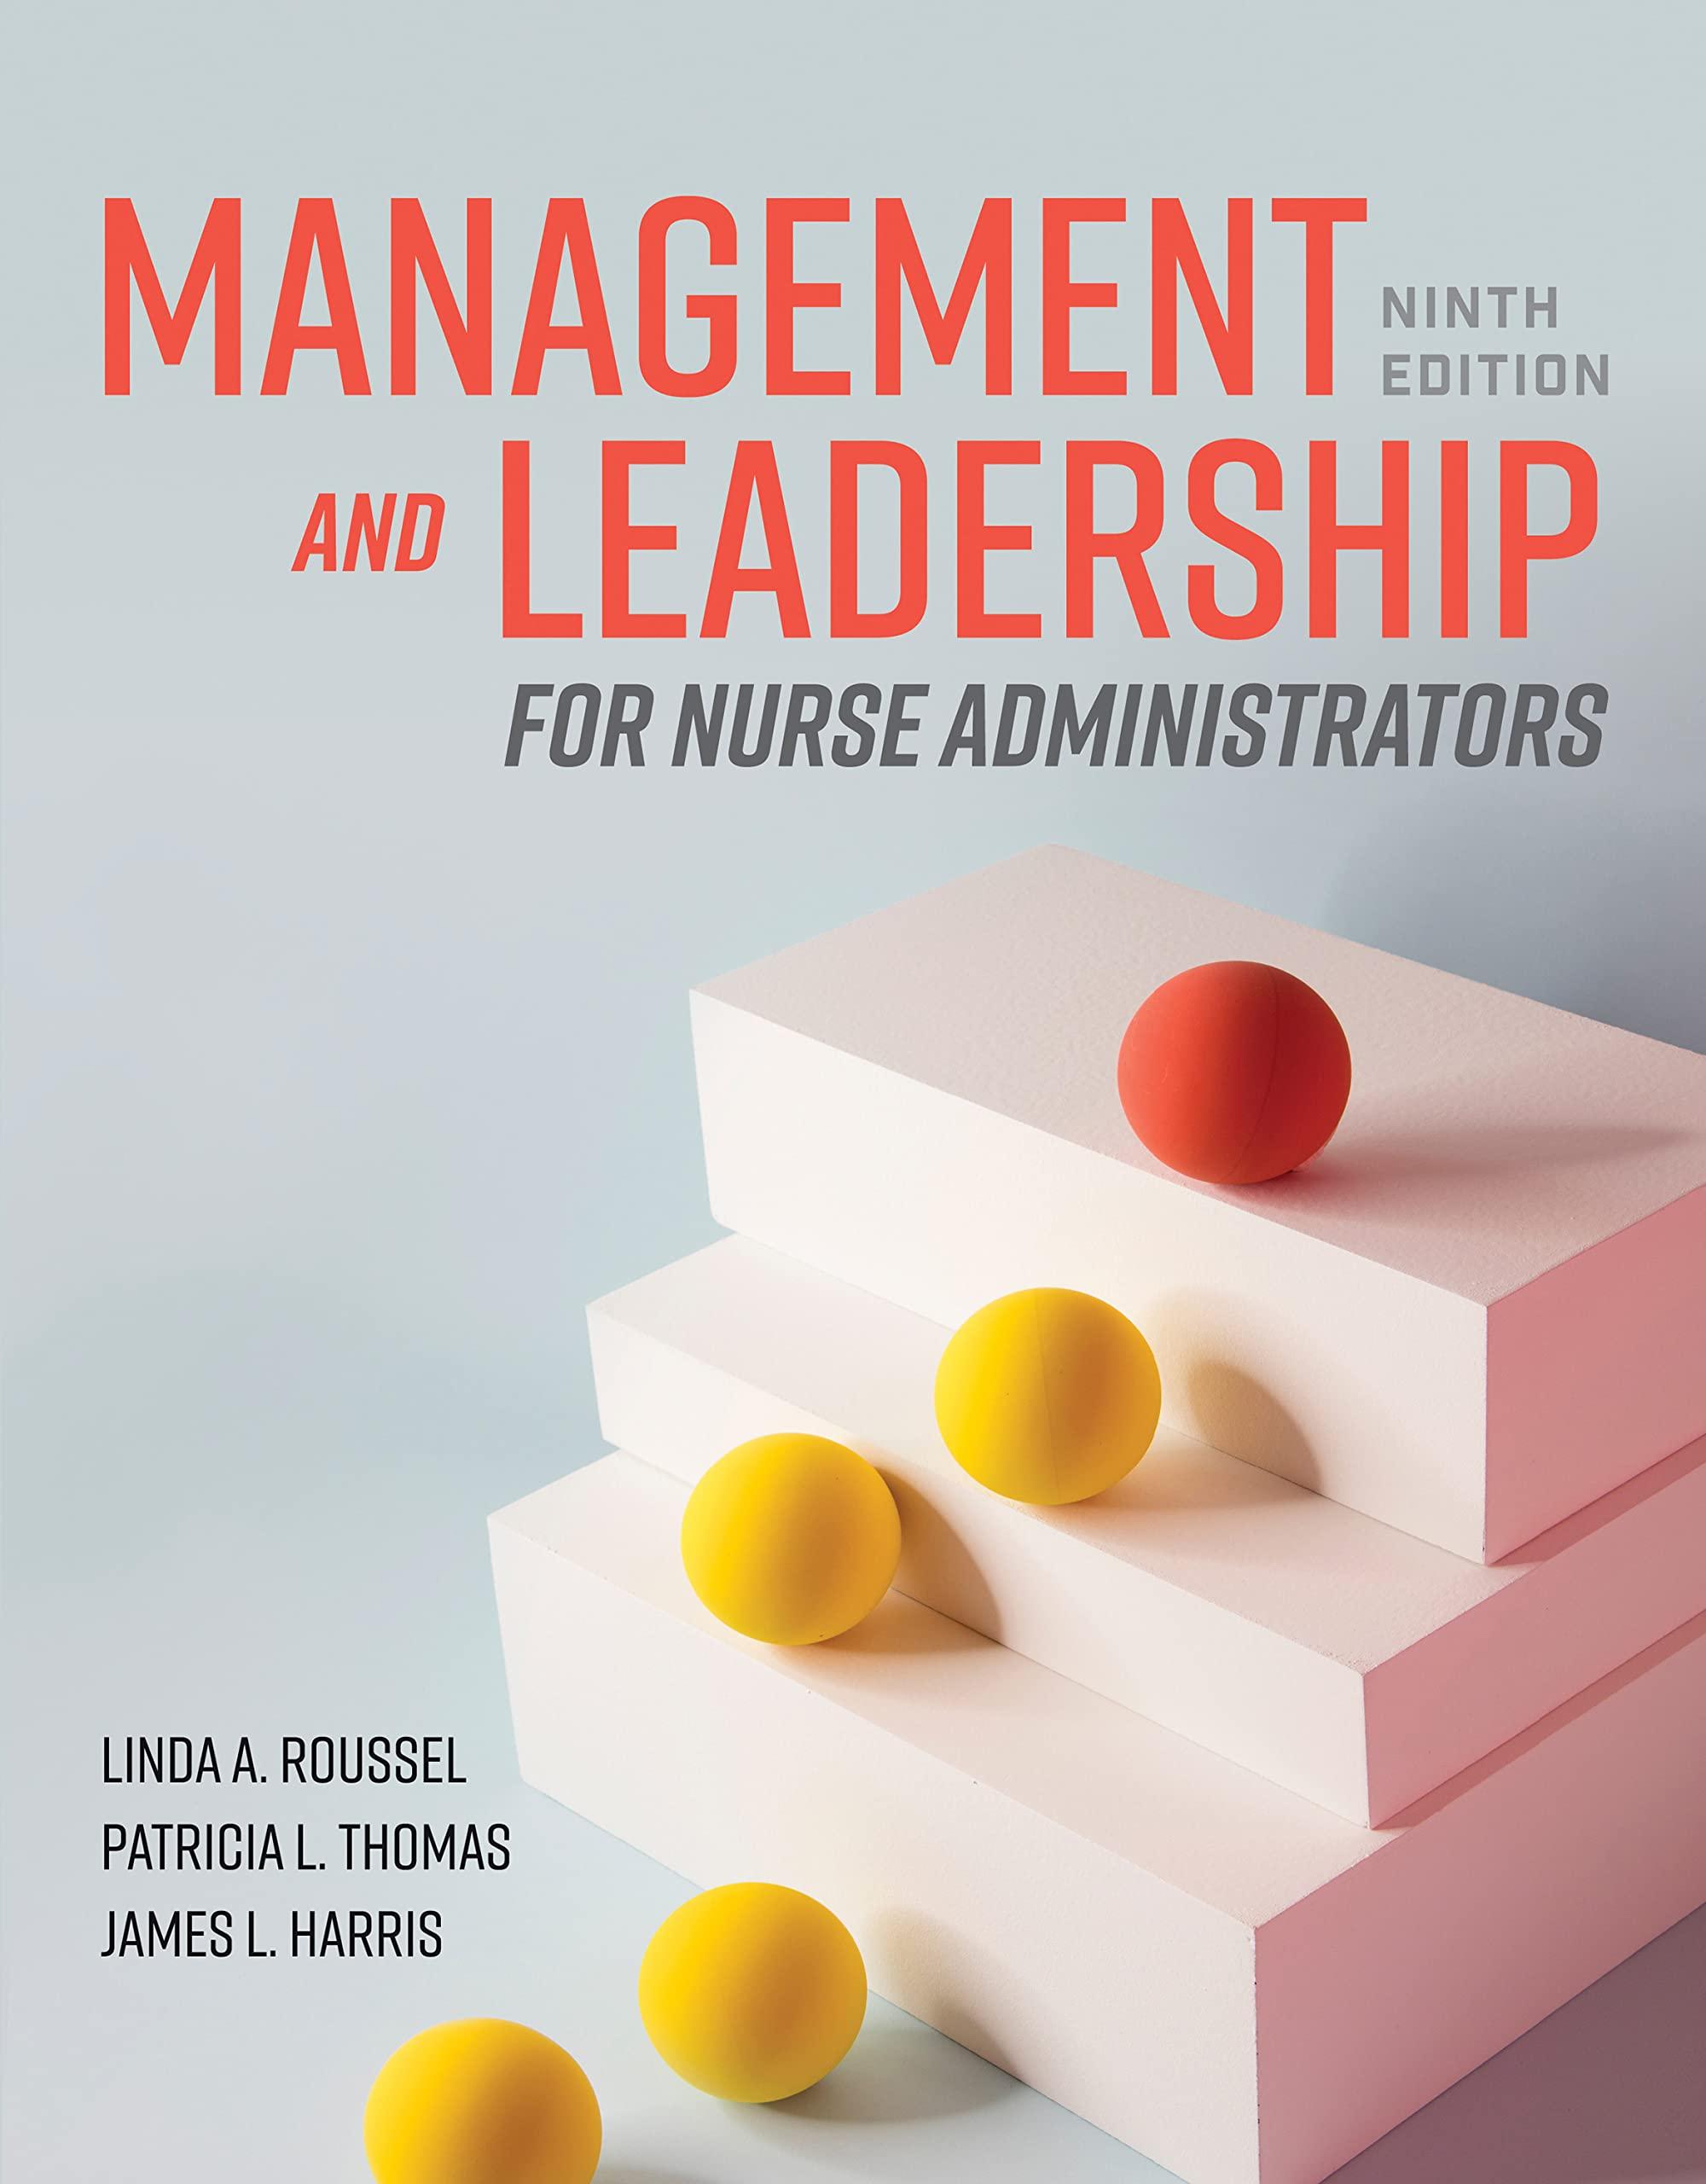 management and leadership for nurse administrators 9th edition linda a. roussel, patricia l. thomas, james l.